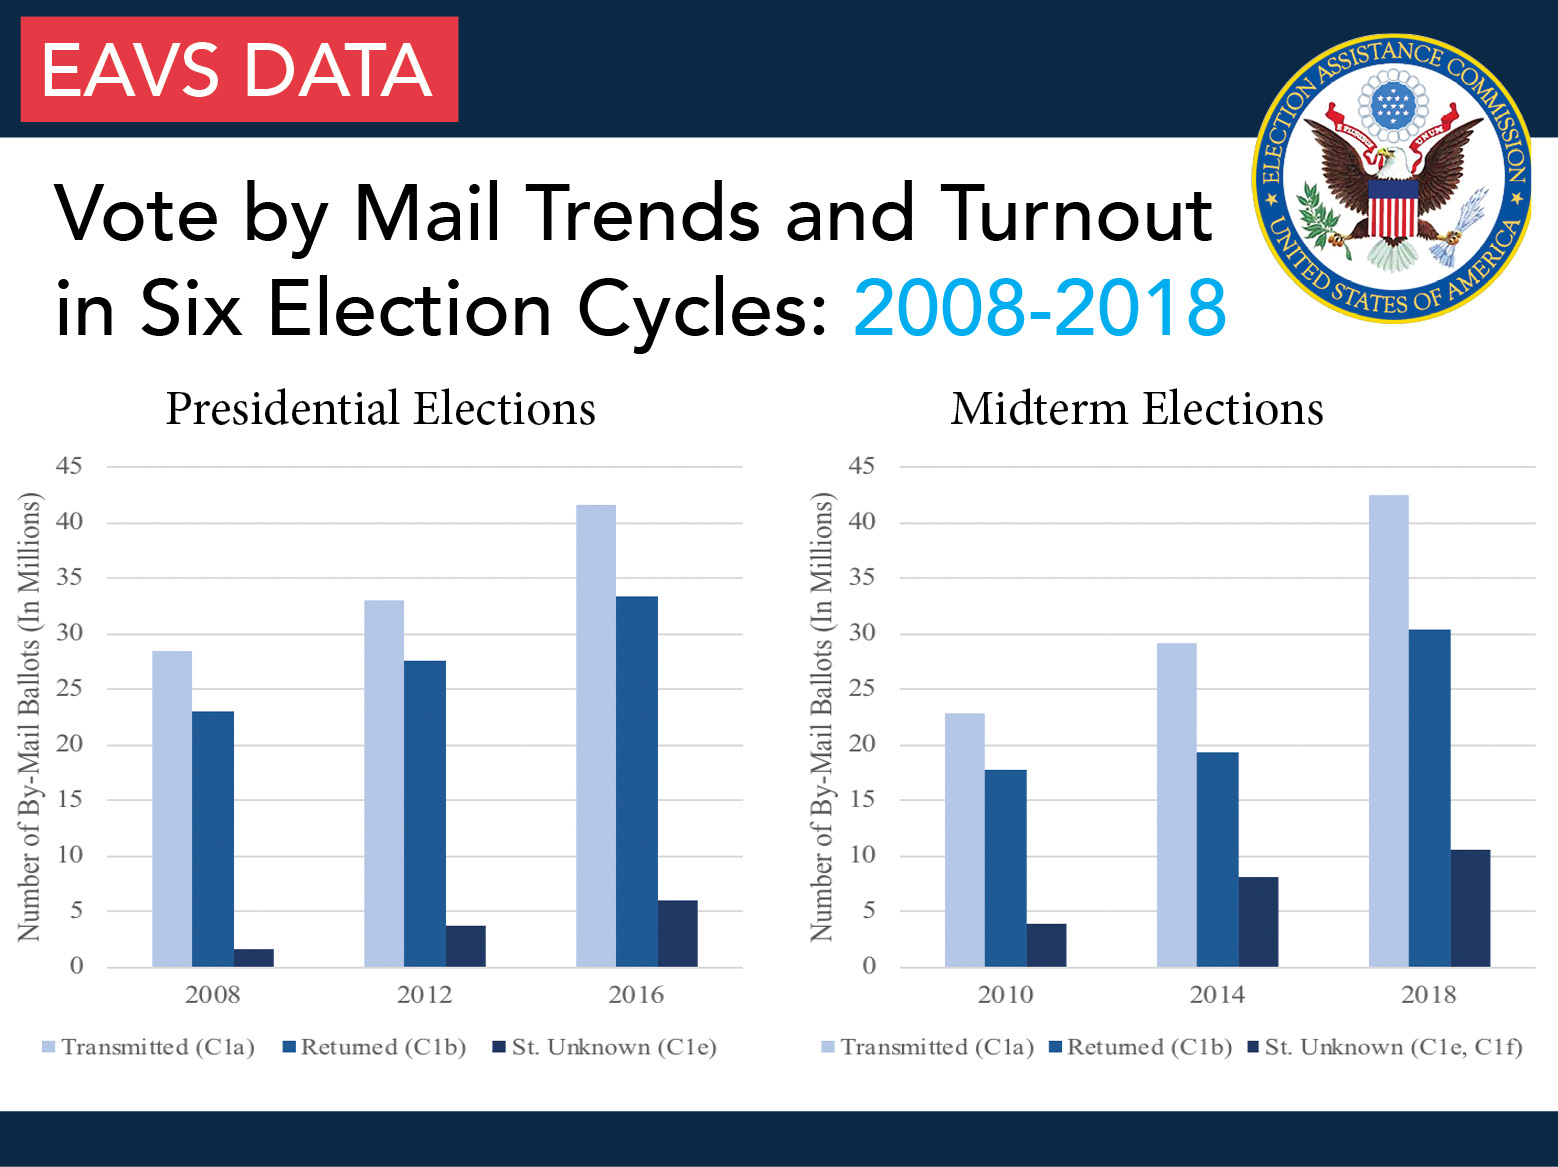 Two bar graphs, one showing the number of by-mail ballots transmitted, returned, and status unknown in presidential elections years (2008, 2012, 2016) and the other bar graph showing the number of by-mail ballots transmitted, returned, and status unknown in midterm election years (2010, 2014, 2018). For 2008, 28,465,784 ballots were transmitted, 23,073,382 ballots were returned, and 1,605,620 ballots were deemed status unknown. For 2012, 33,070,385 ballots were transmitted, 27,624,254 ballots were returned,